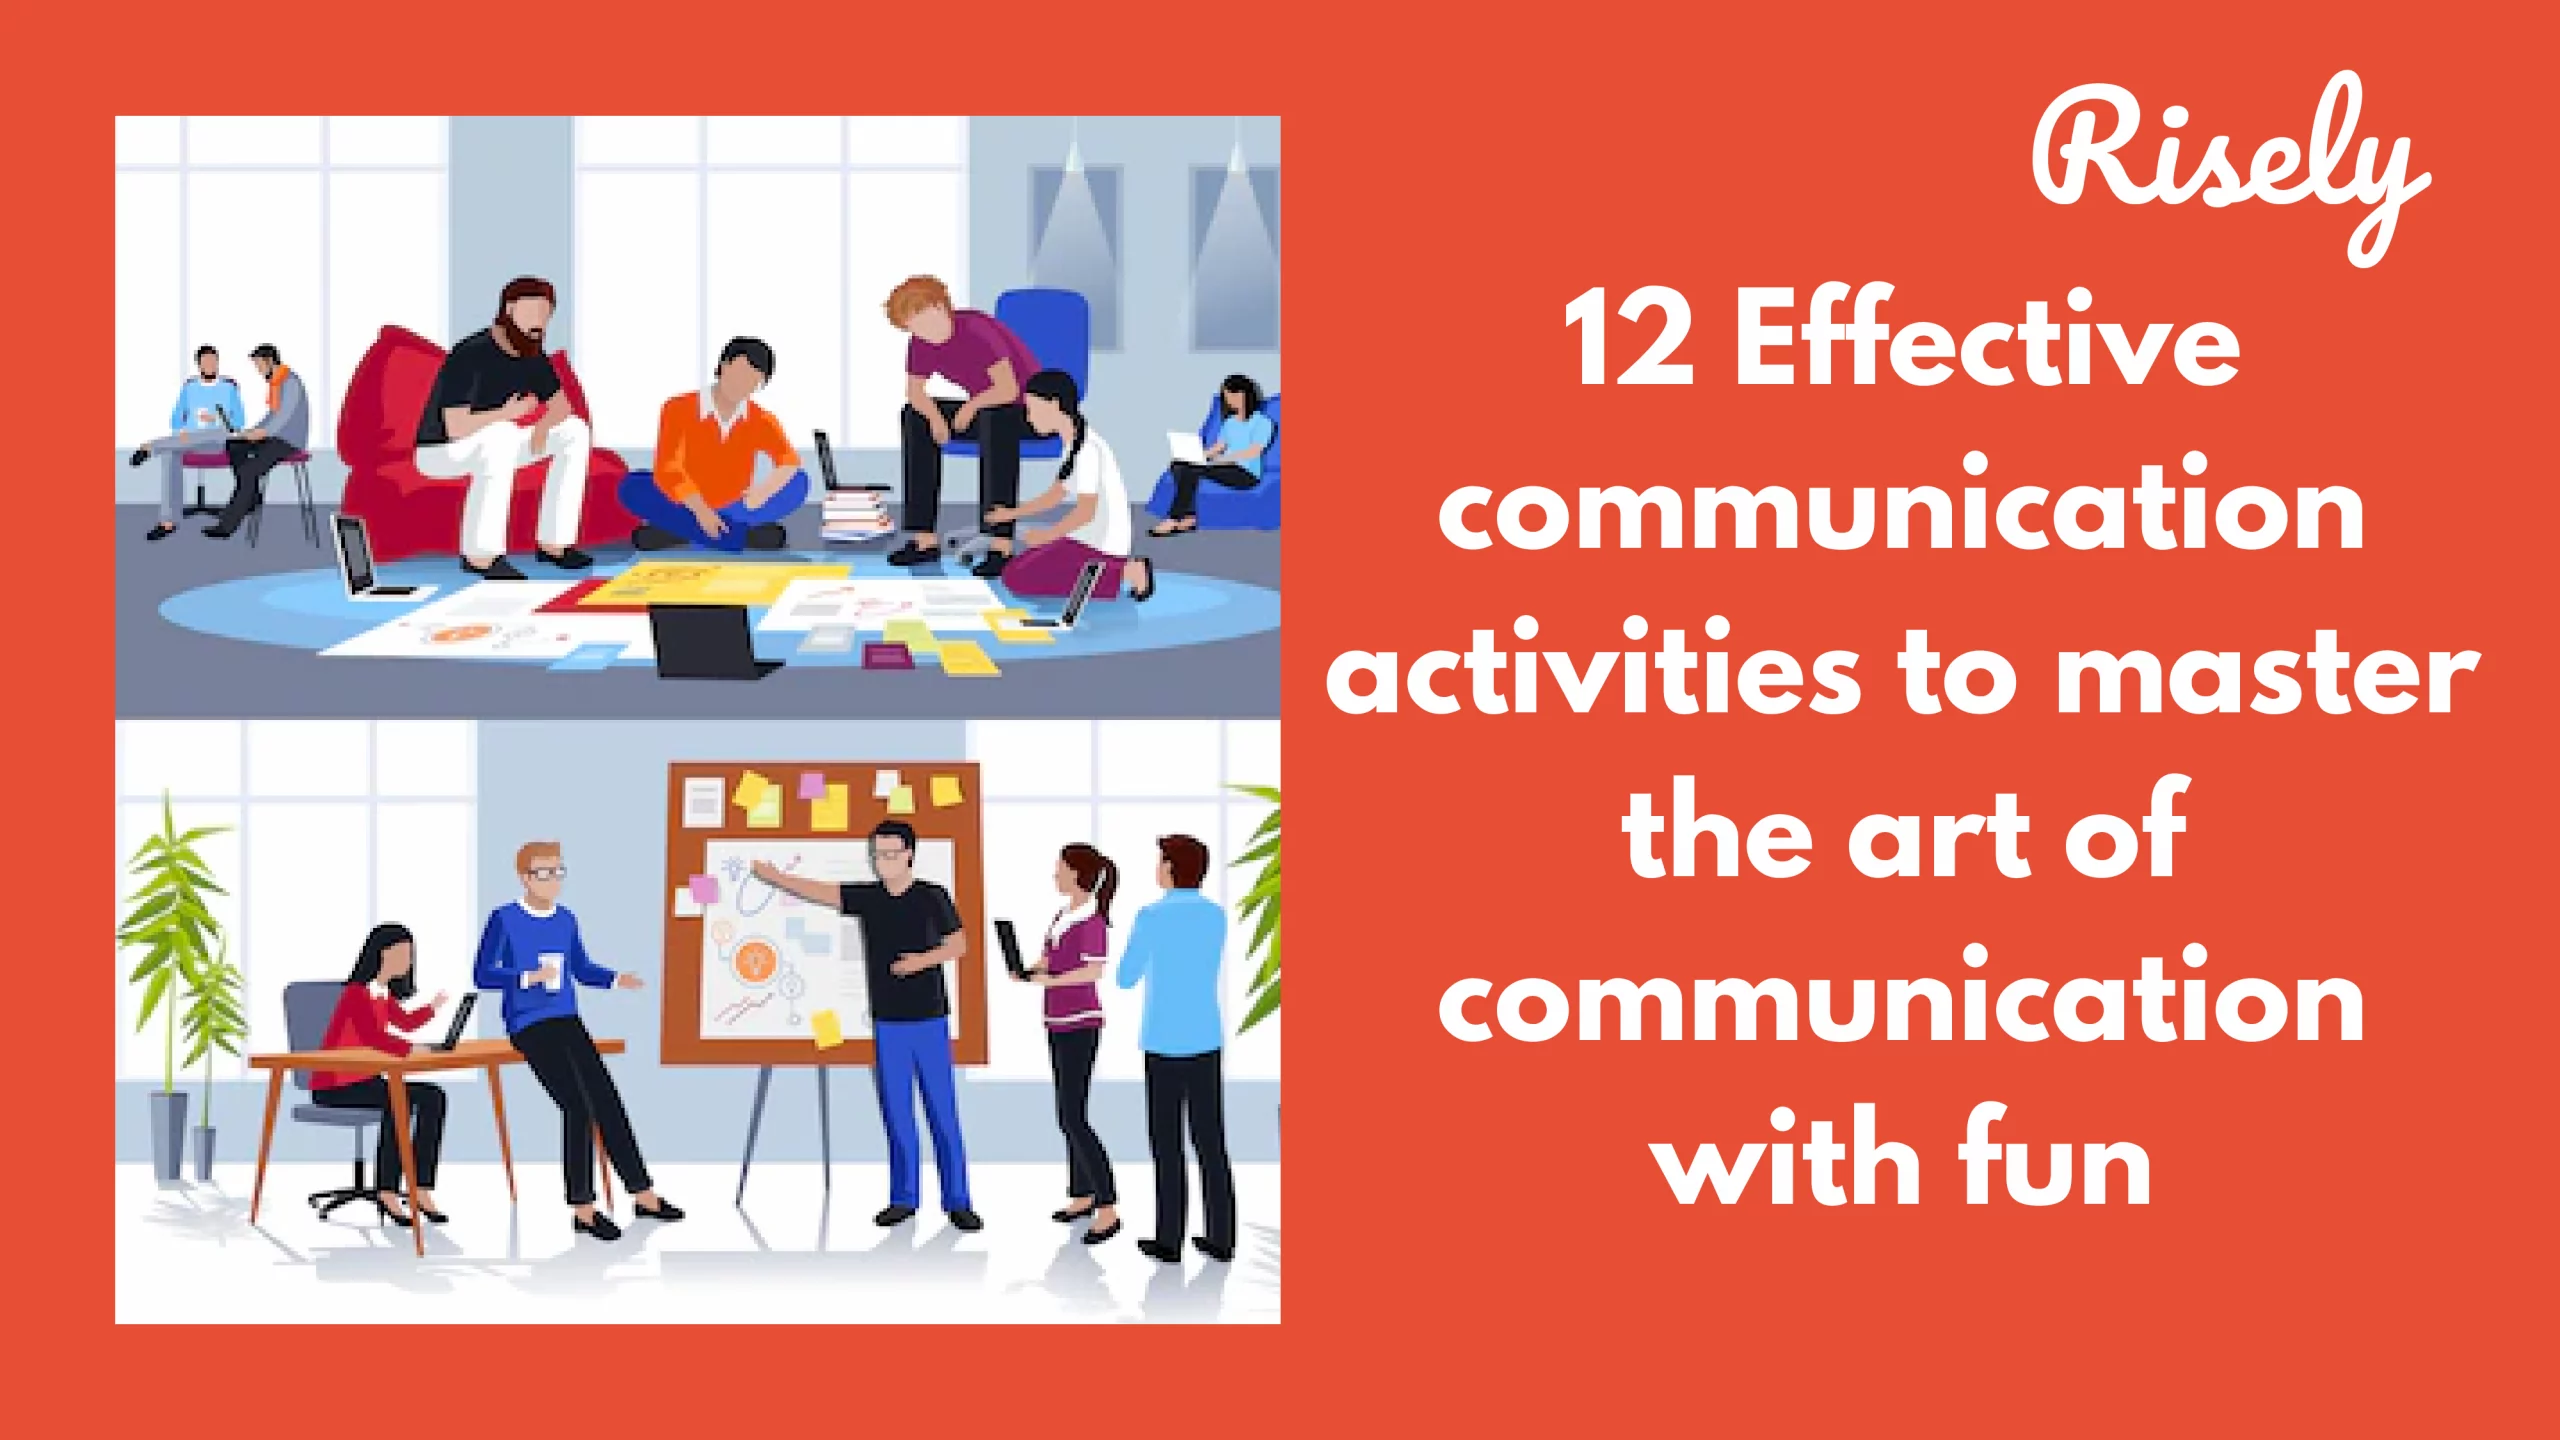 12 Effective Communication activities to master the art of communication with fun